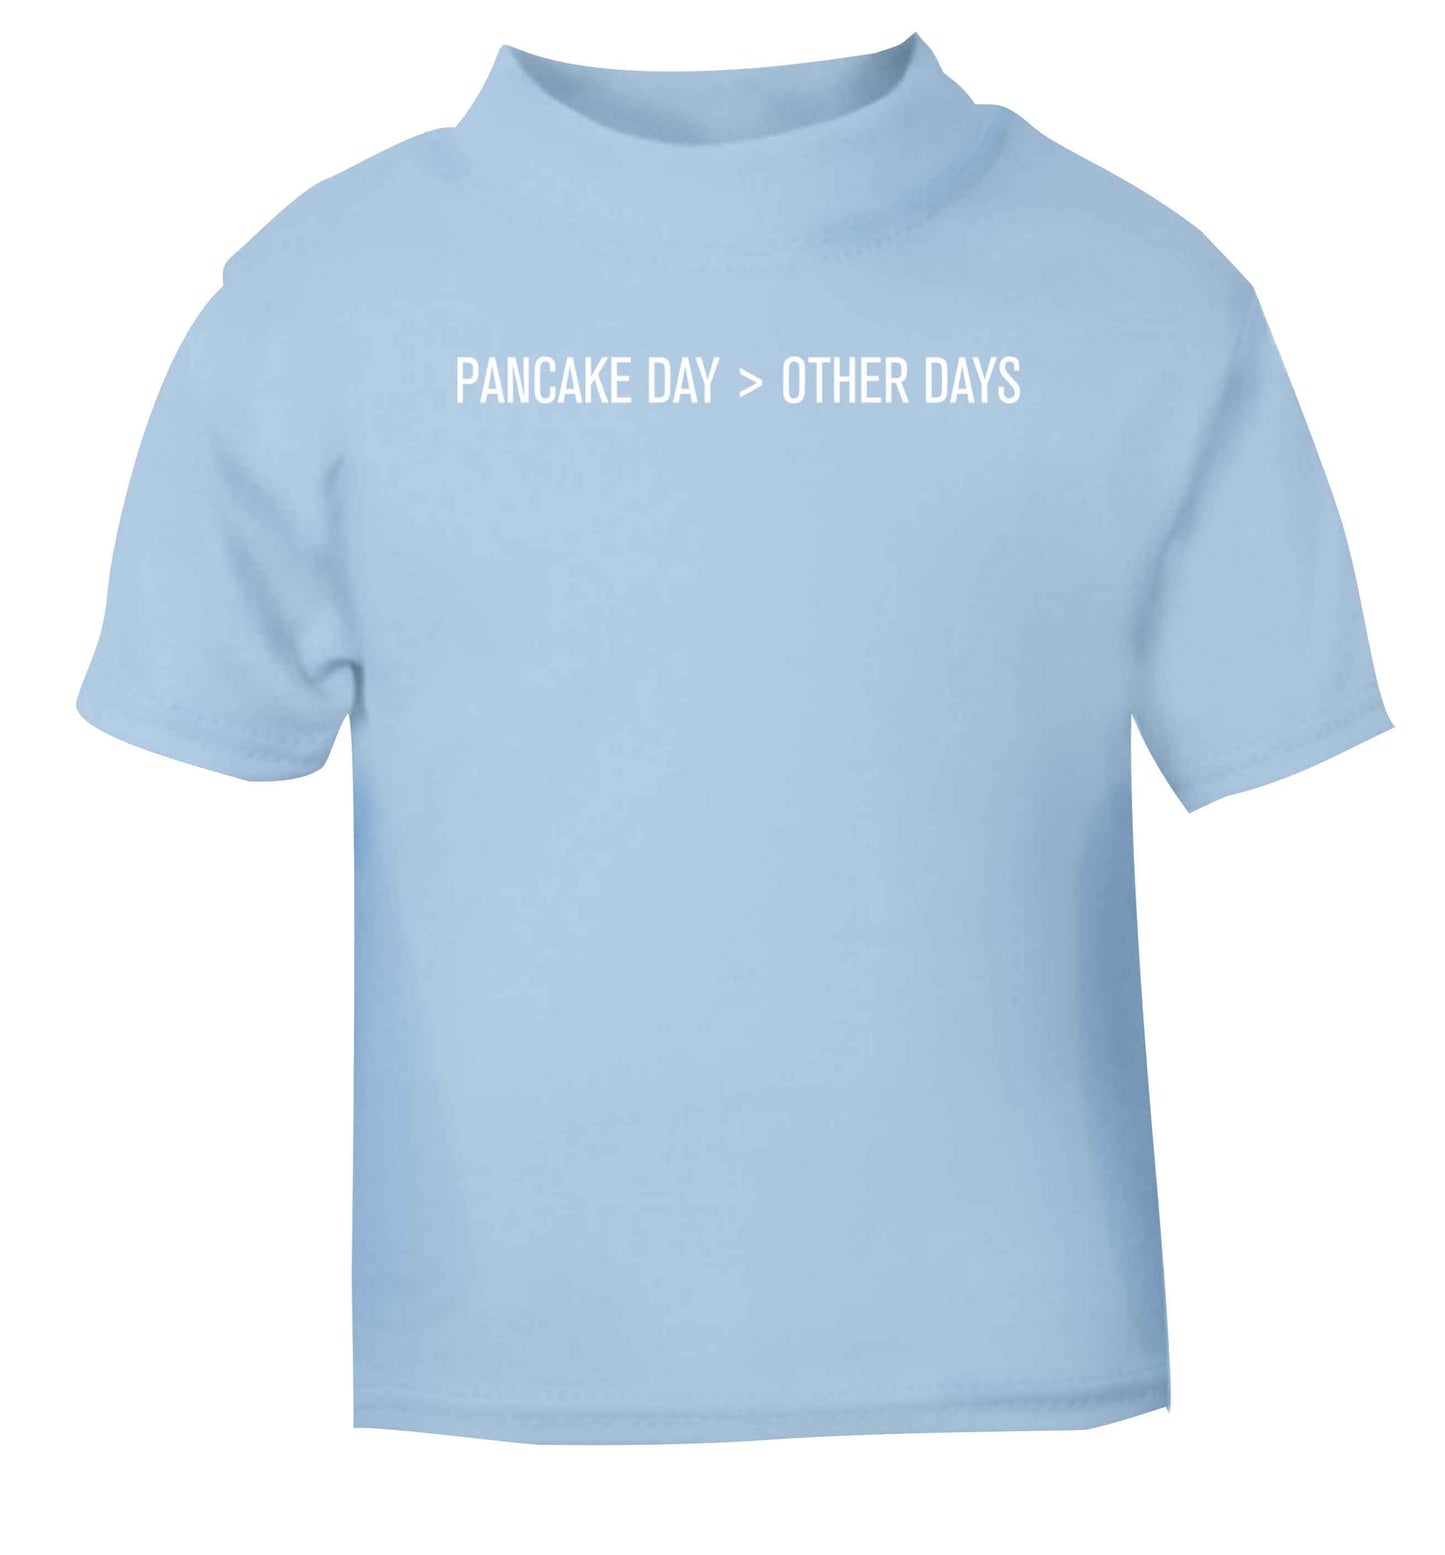 Pancake day > other days light blue baby toddler Tshirt 2 Years